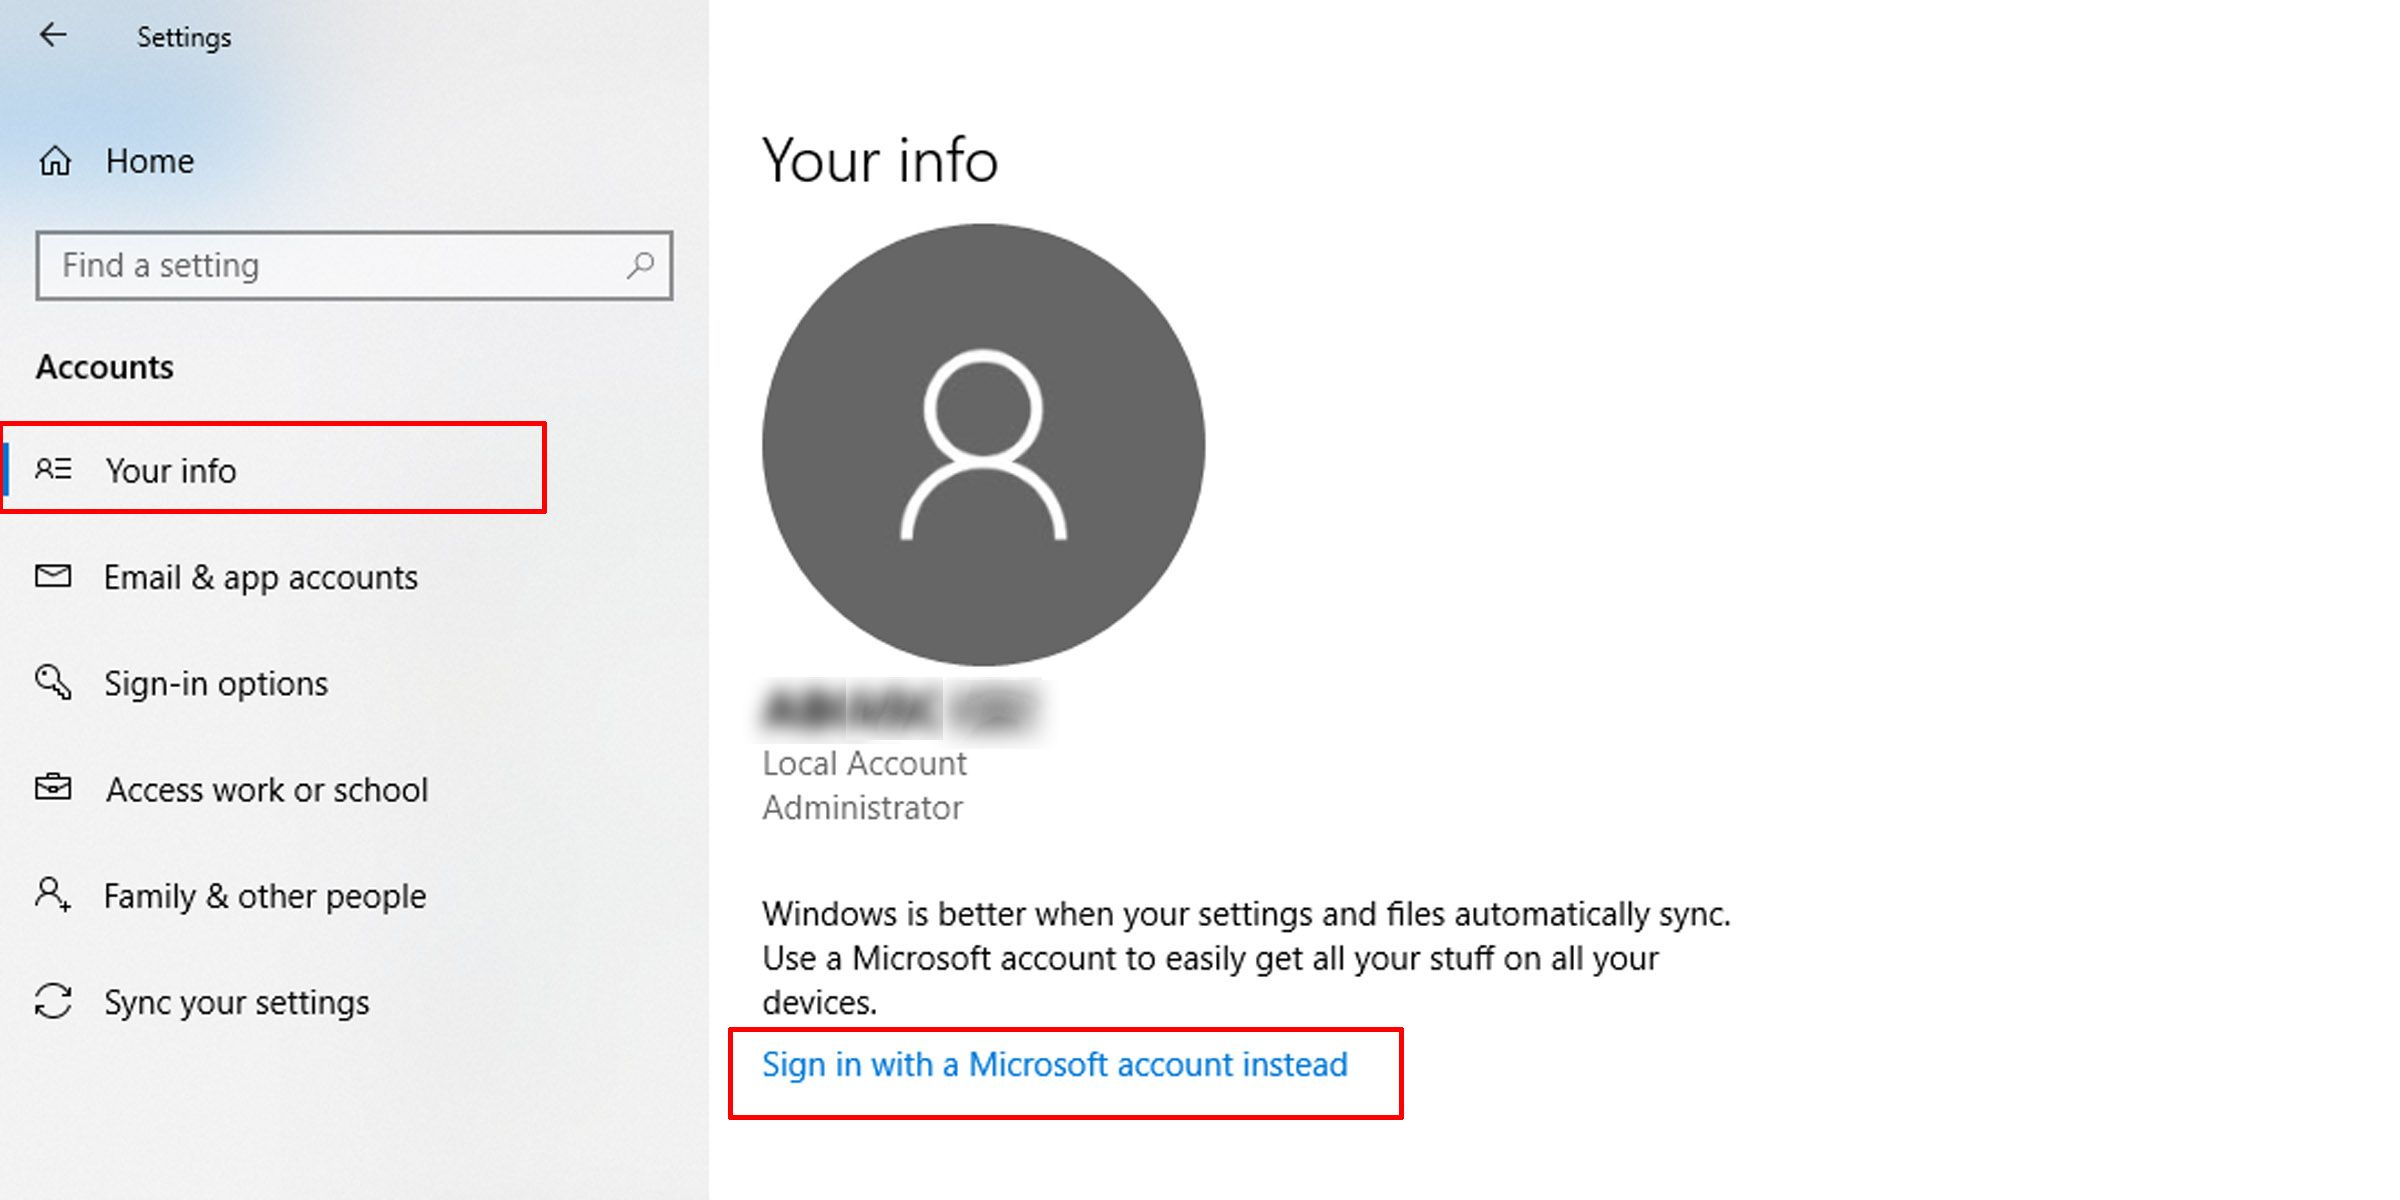 How to switch to your Microsoft account